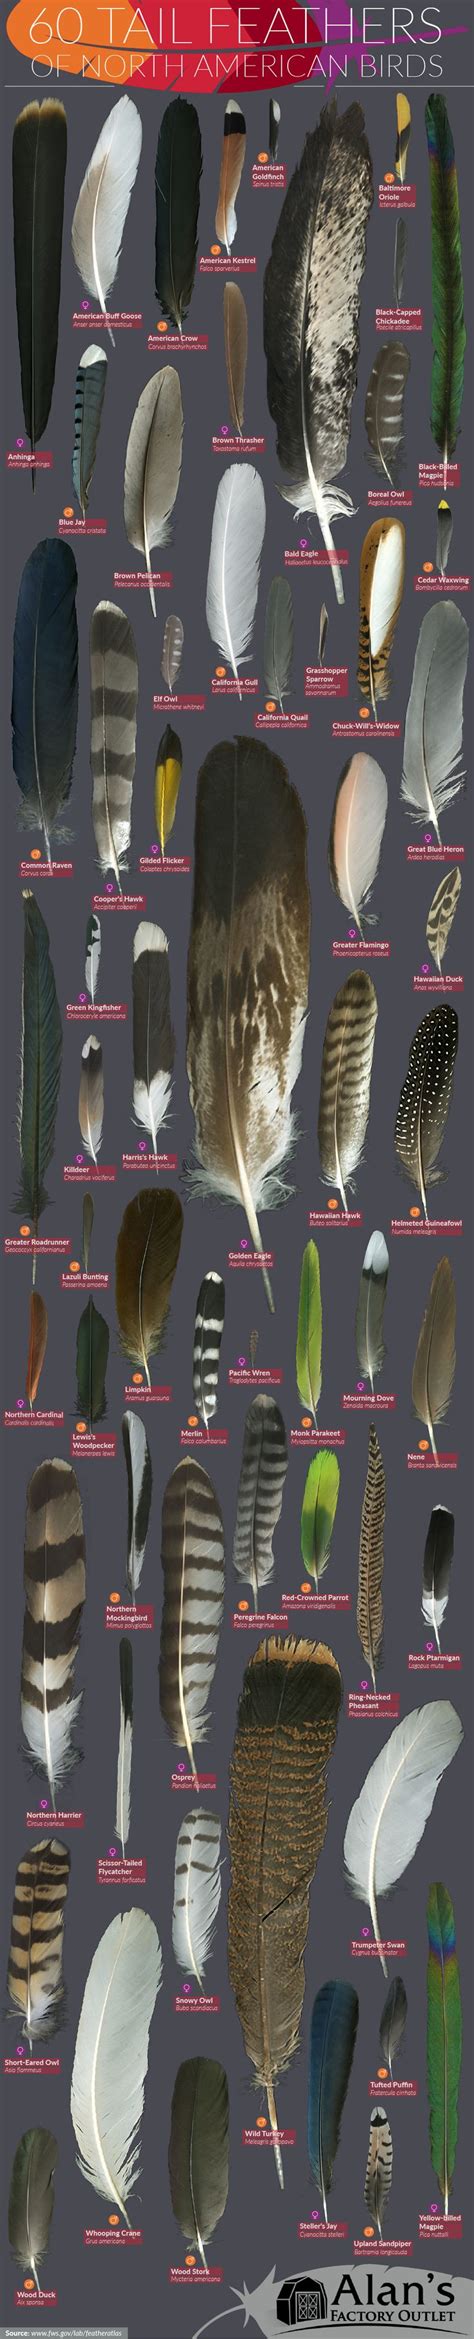 How To Identify 60 Bird Feathers In North America Infographic Identifying Birds Beautiful